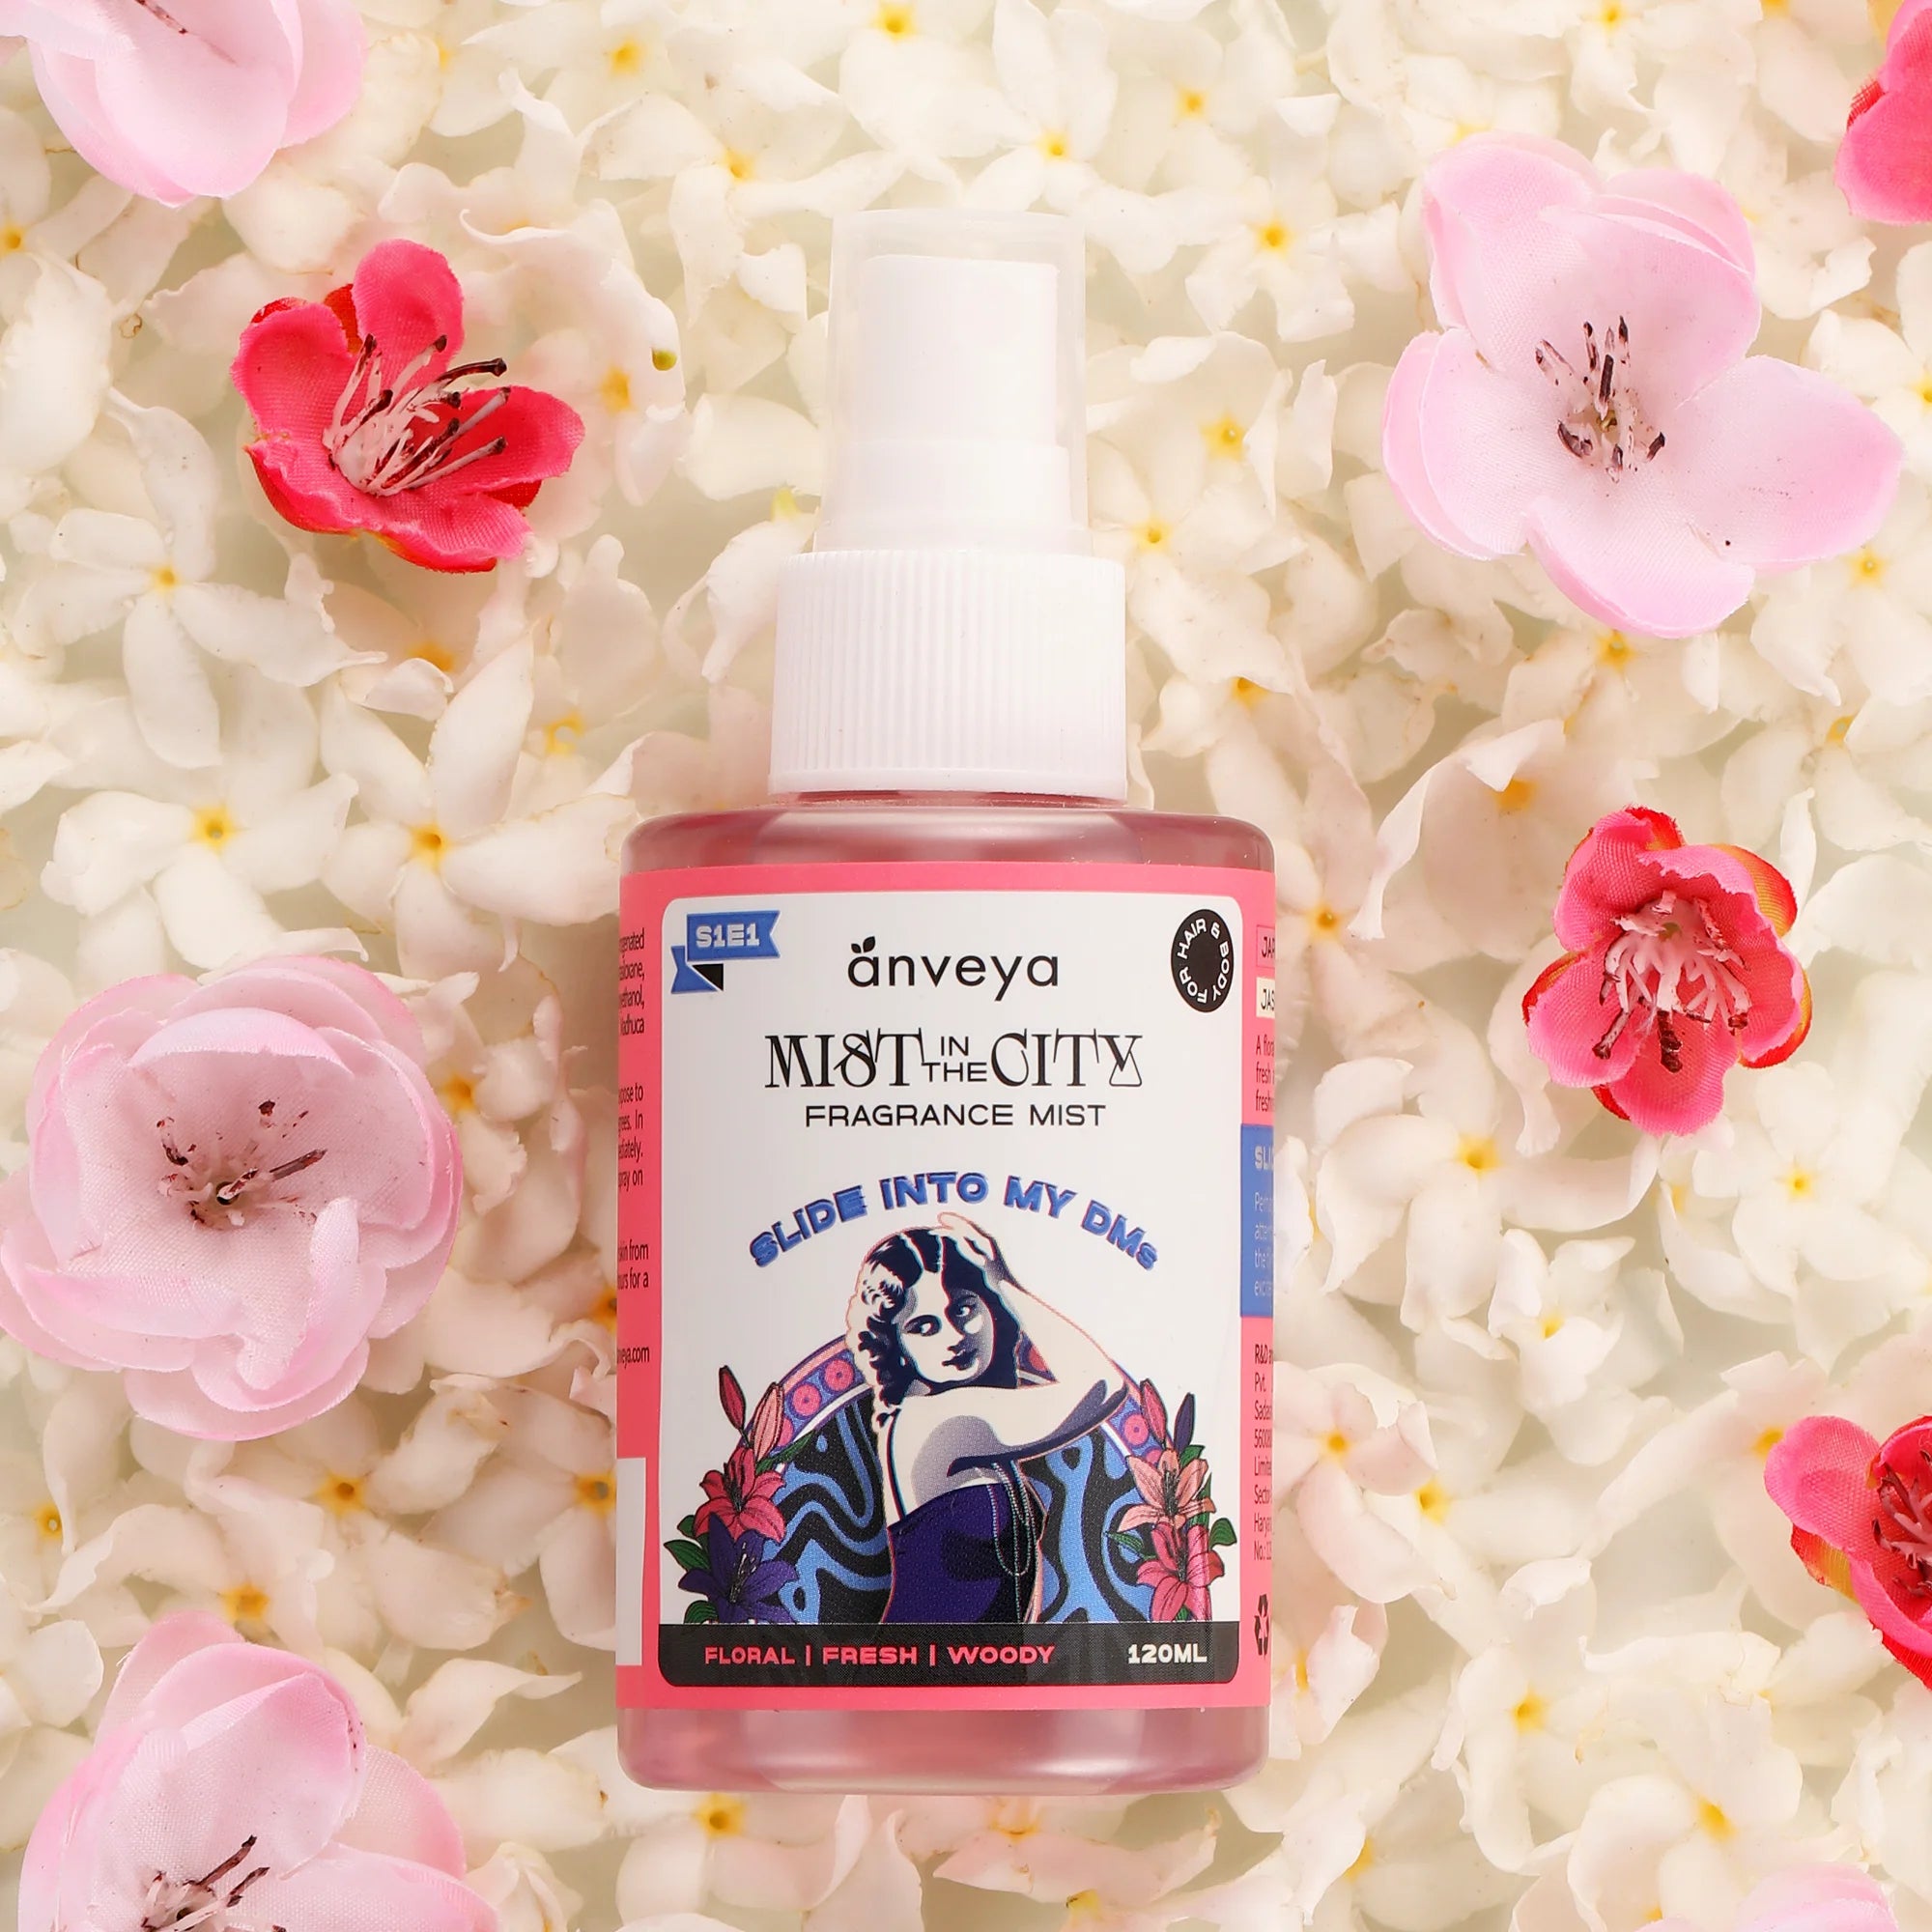 Anveya Body and Hair Fragrance Mist in the City